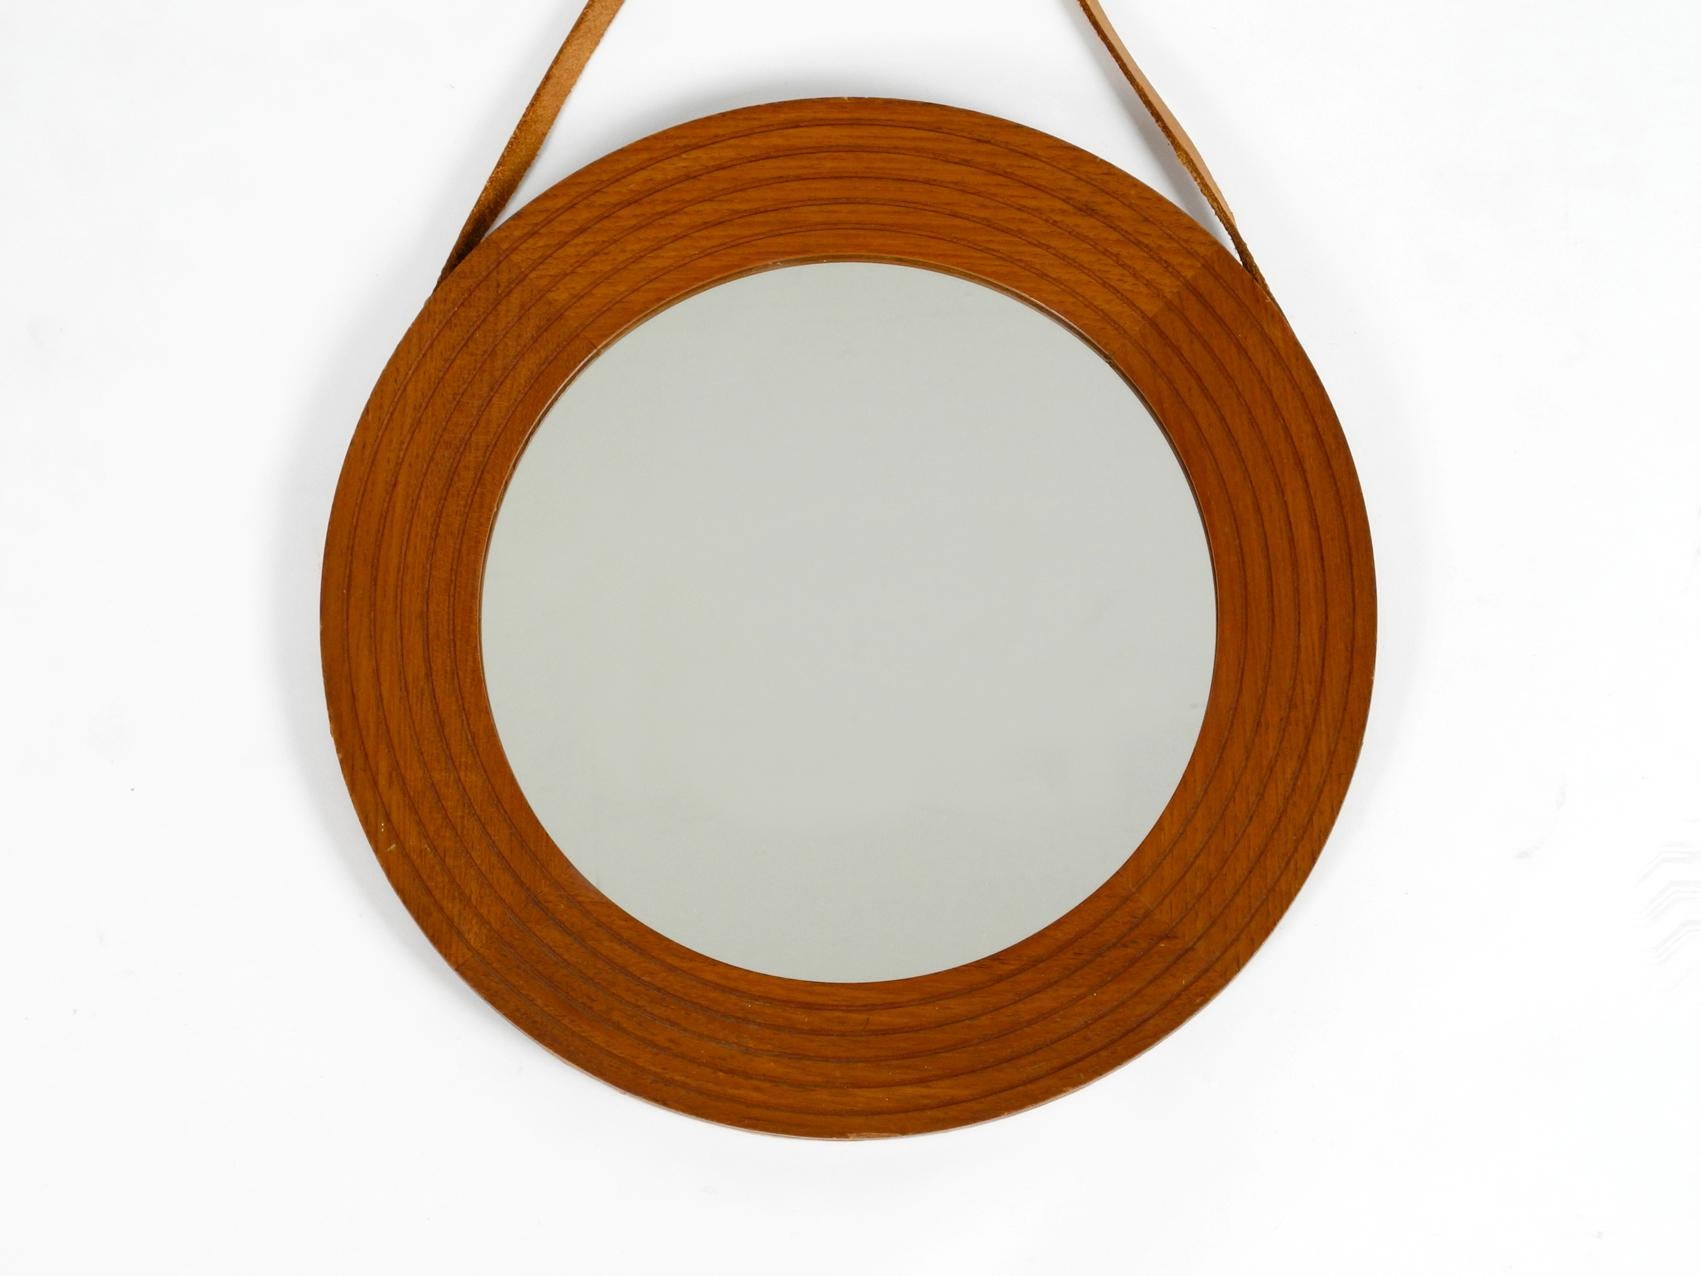 Original 1960s beautiful wall mirror with wide teak frame. The original leather strap for hanging is completely stretched around the mirror.
Very high-quality workmanship in a Minimalist Danish design. 100% original condition and in very good